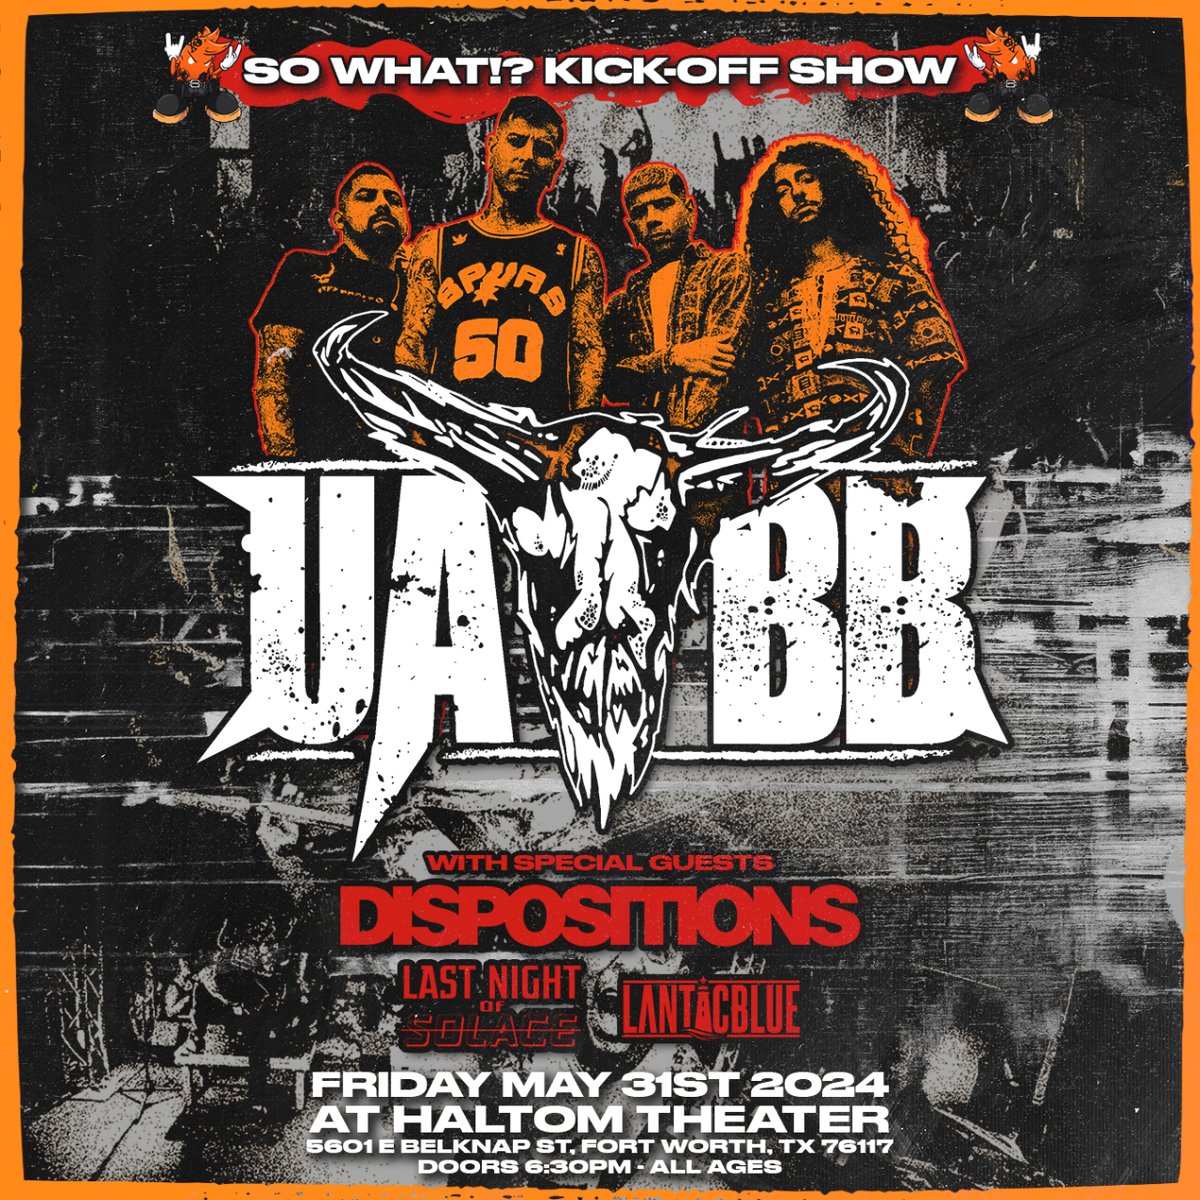 NEW KICK OFF SHOW JUST DROPPED 🫨 Join us +  @UABB with special guests @dispositionstx , Last Night of Solace, @lanticblueband  at Haltom Theater on Friday May 31st. wl.seetickets.us/event/upon-a-b…